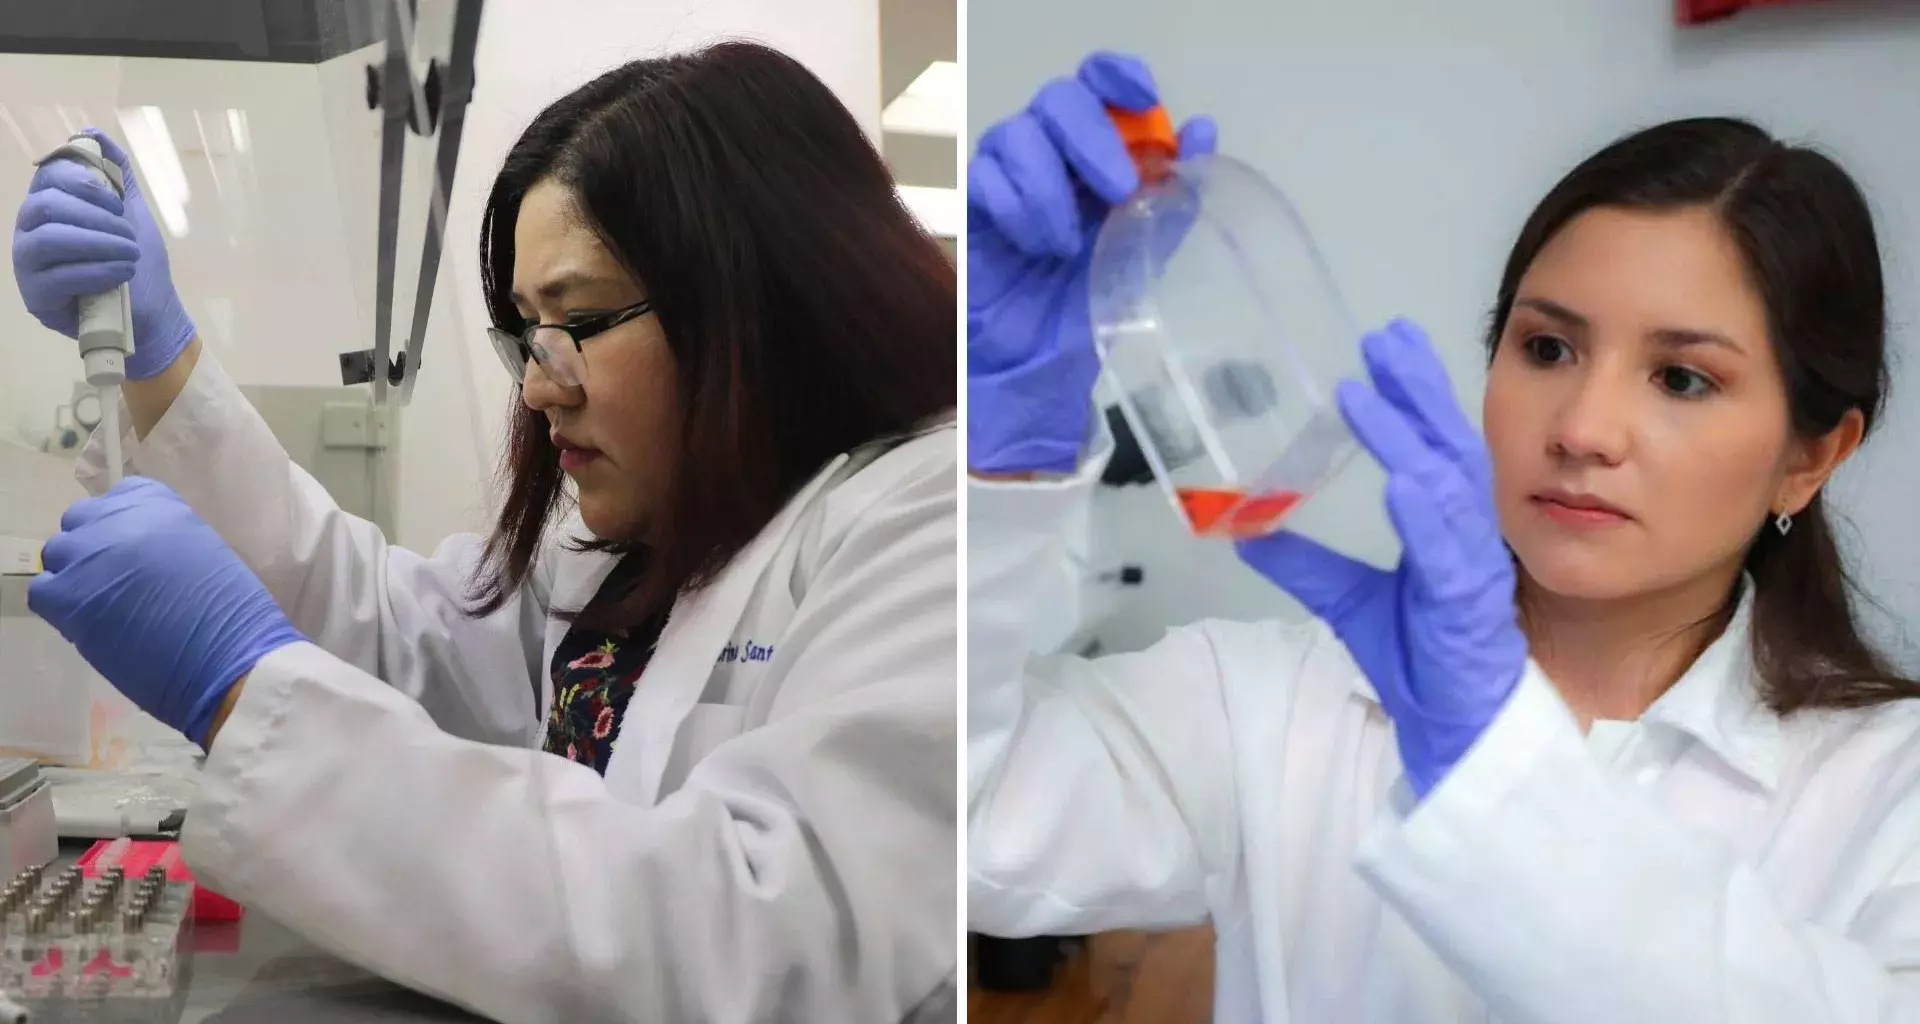 Two Tec women are among the 25 best scientists from LATAM in 2022